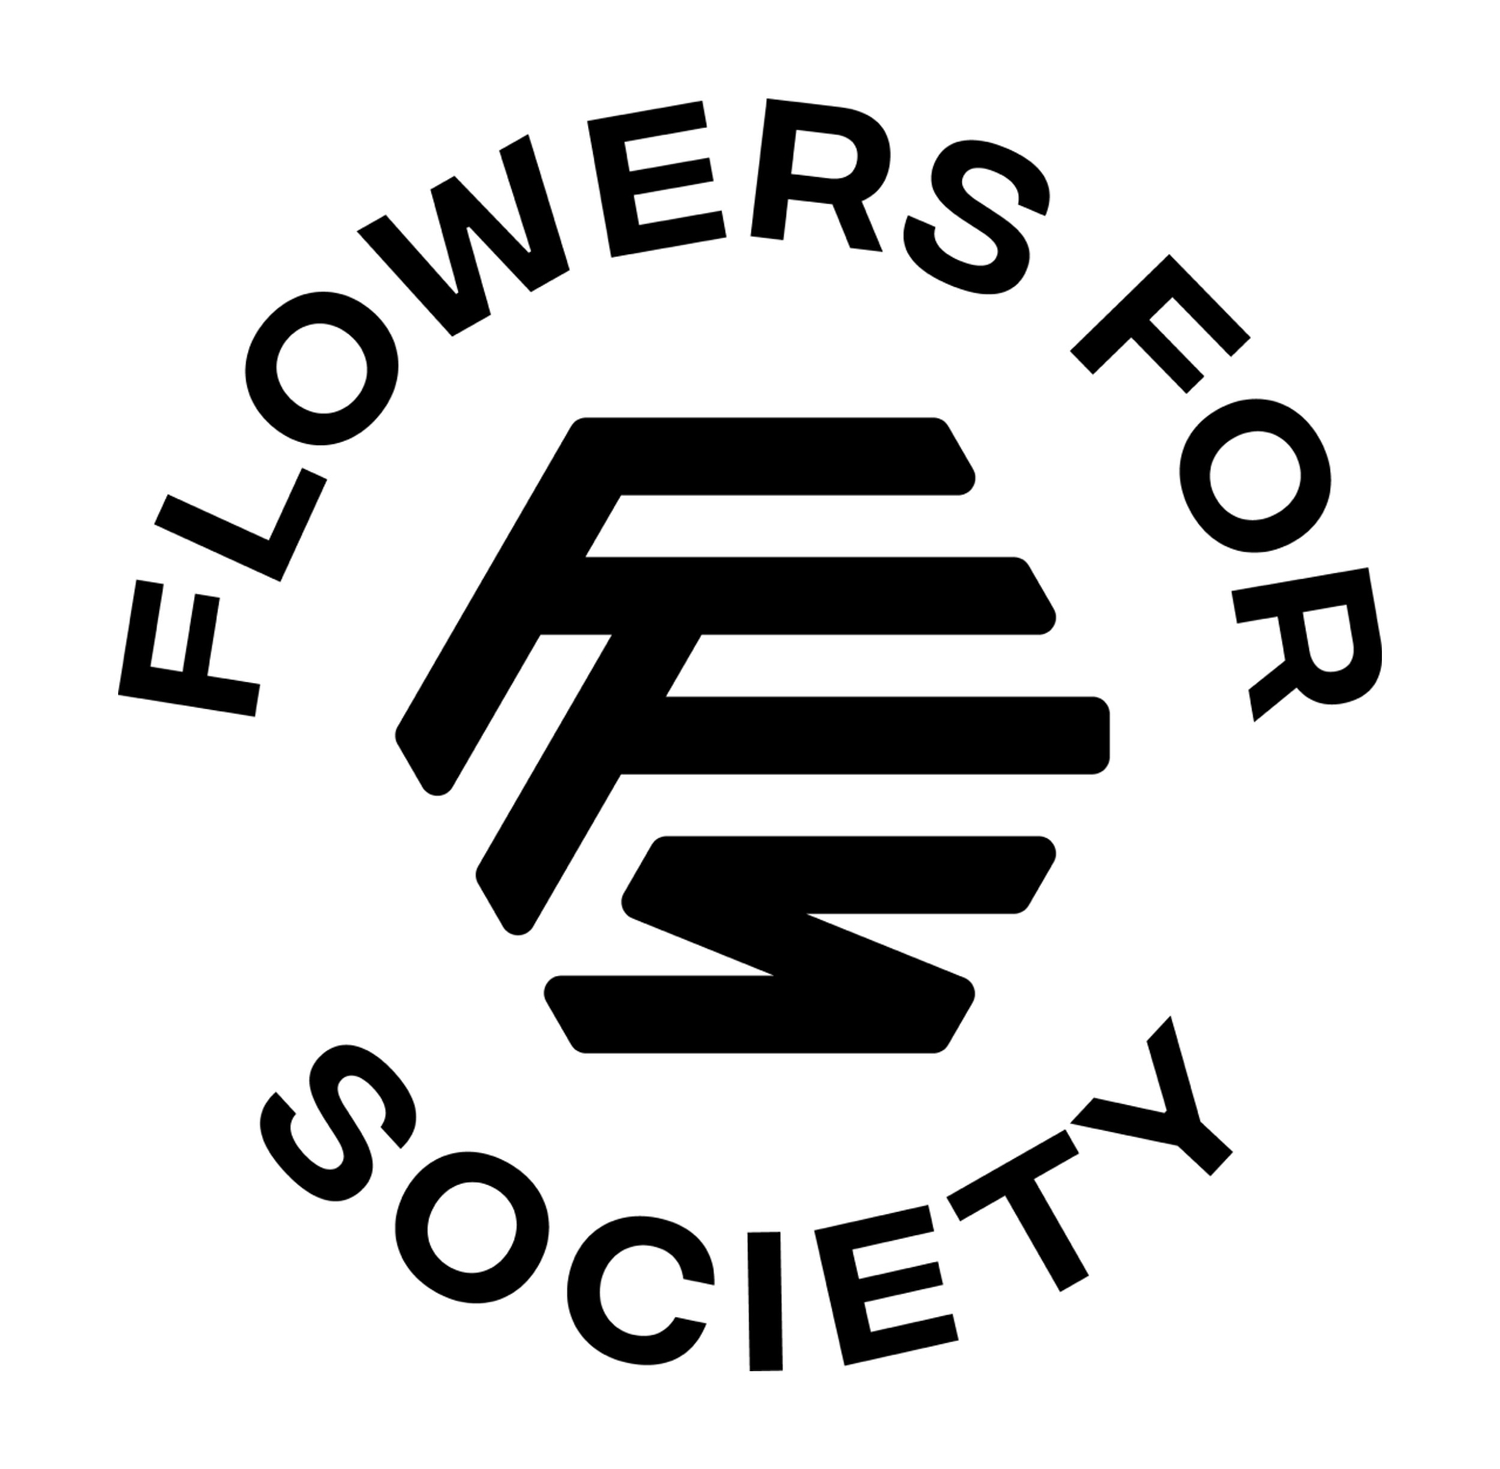 FLOWERS FOR SOCIETY